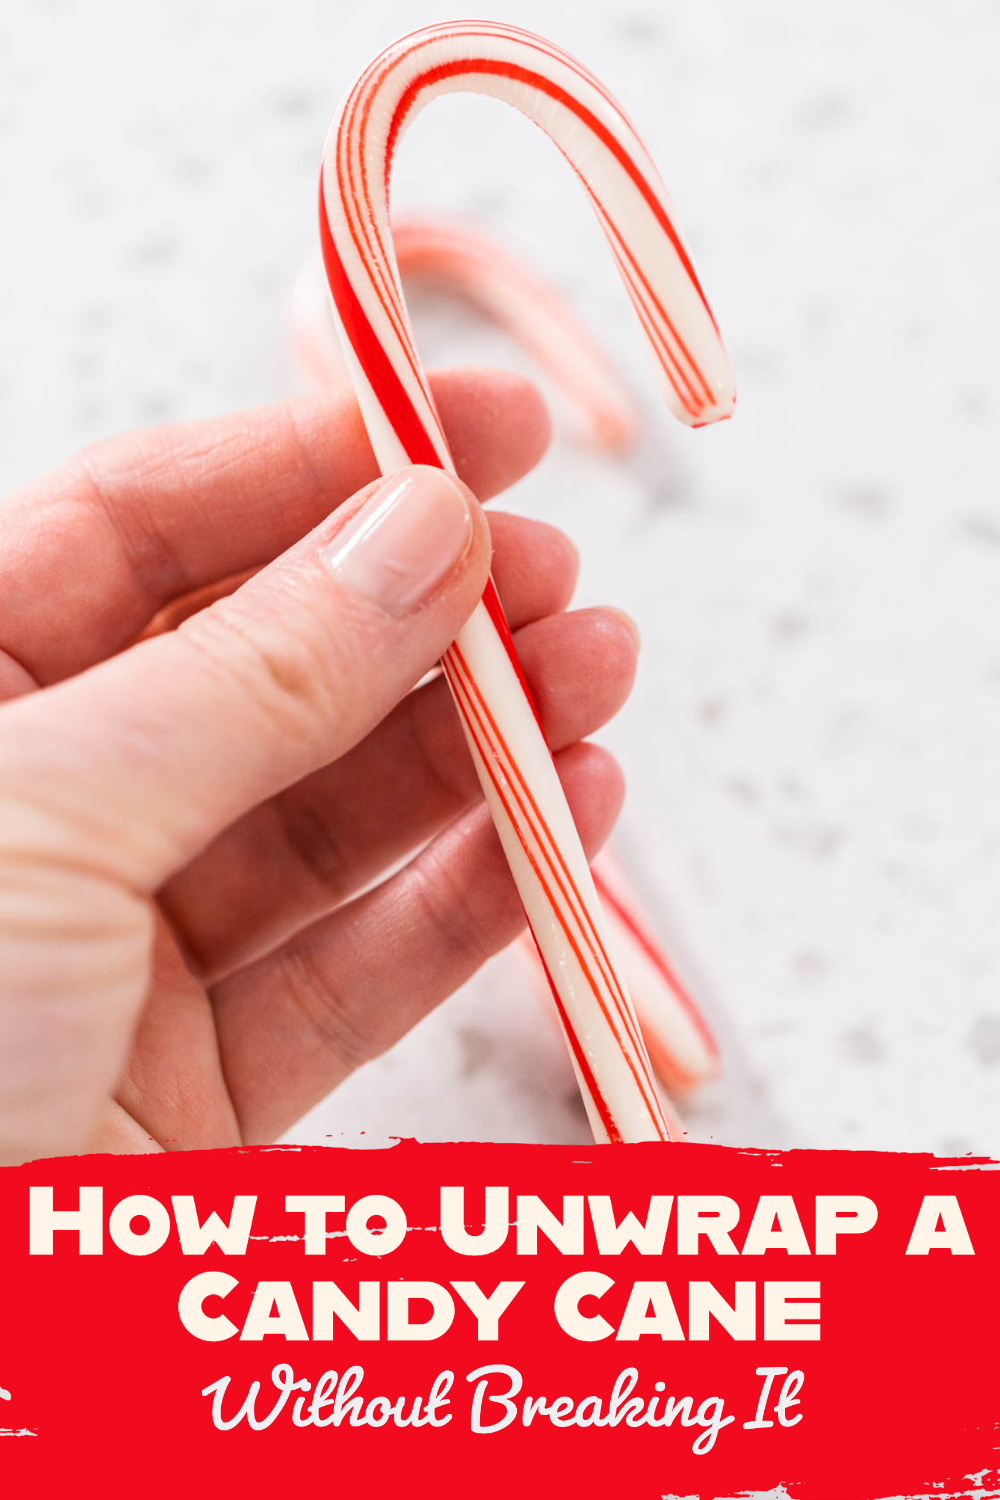 How to Unwrap a Candy Cane Without Breaking It